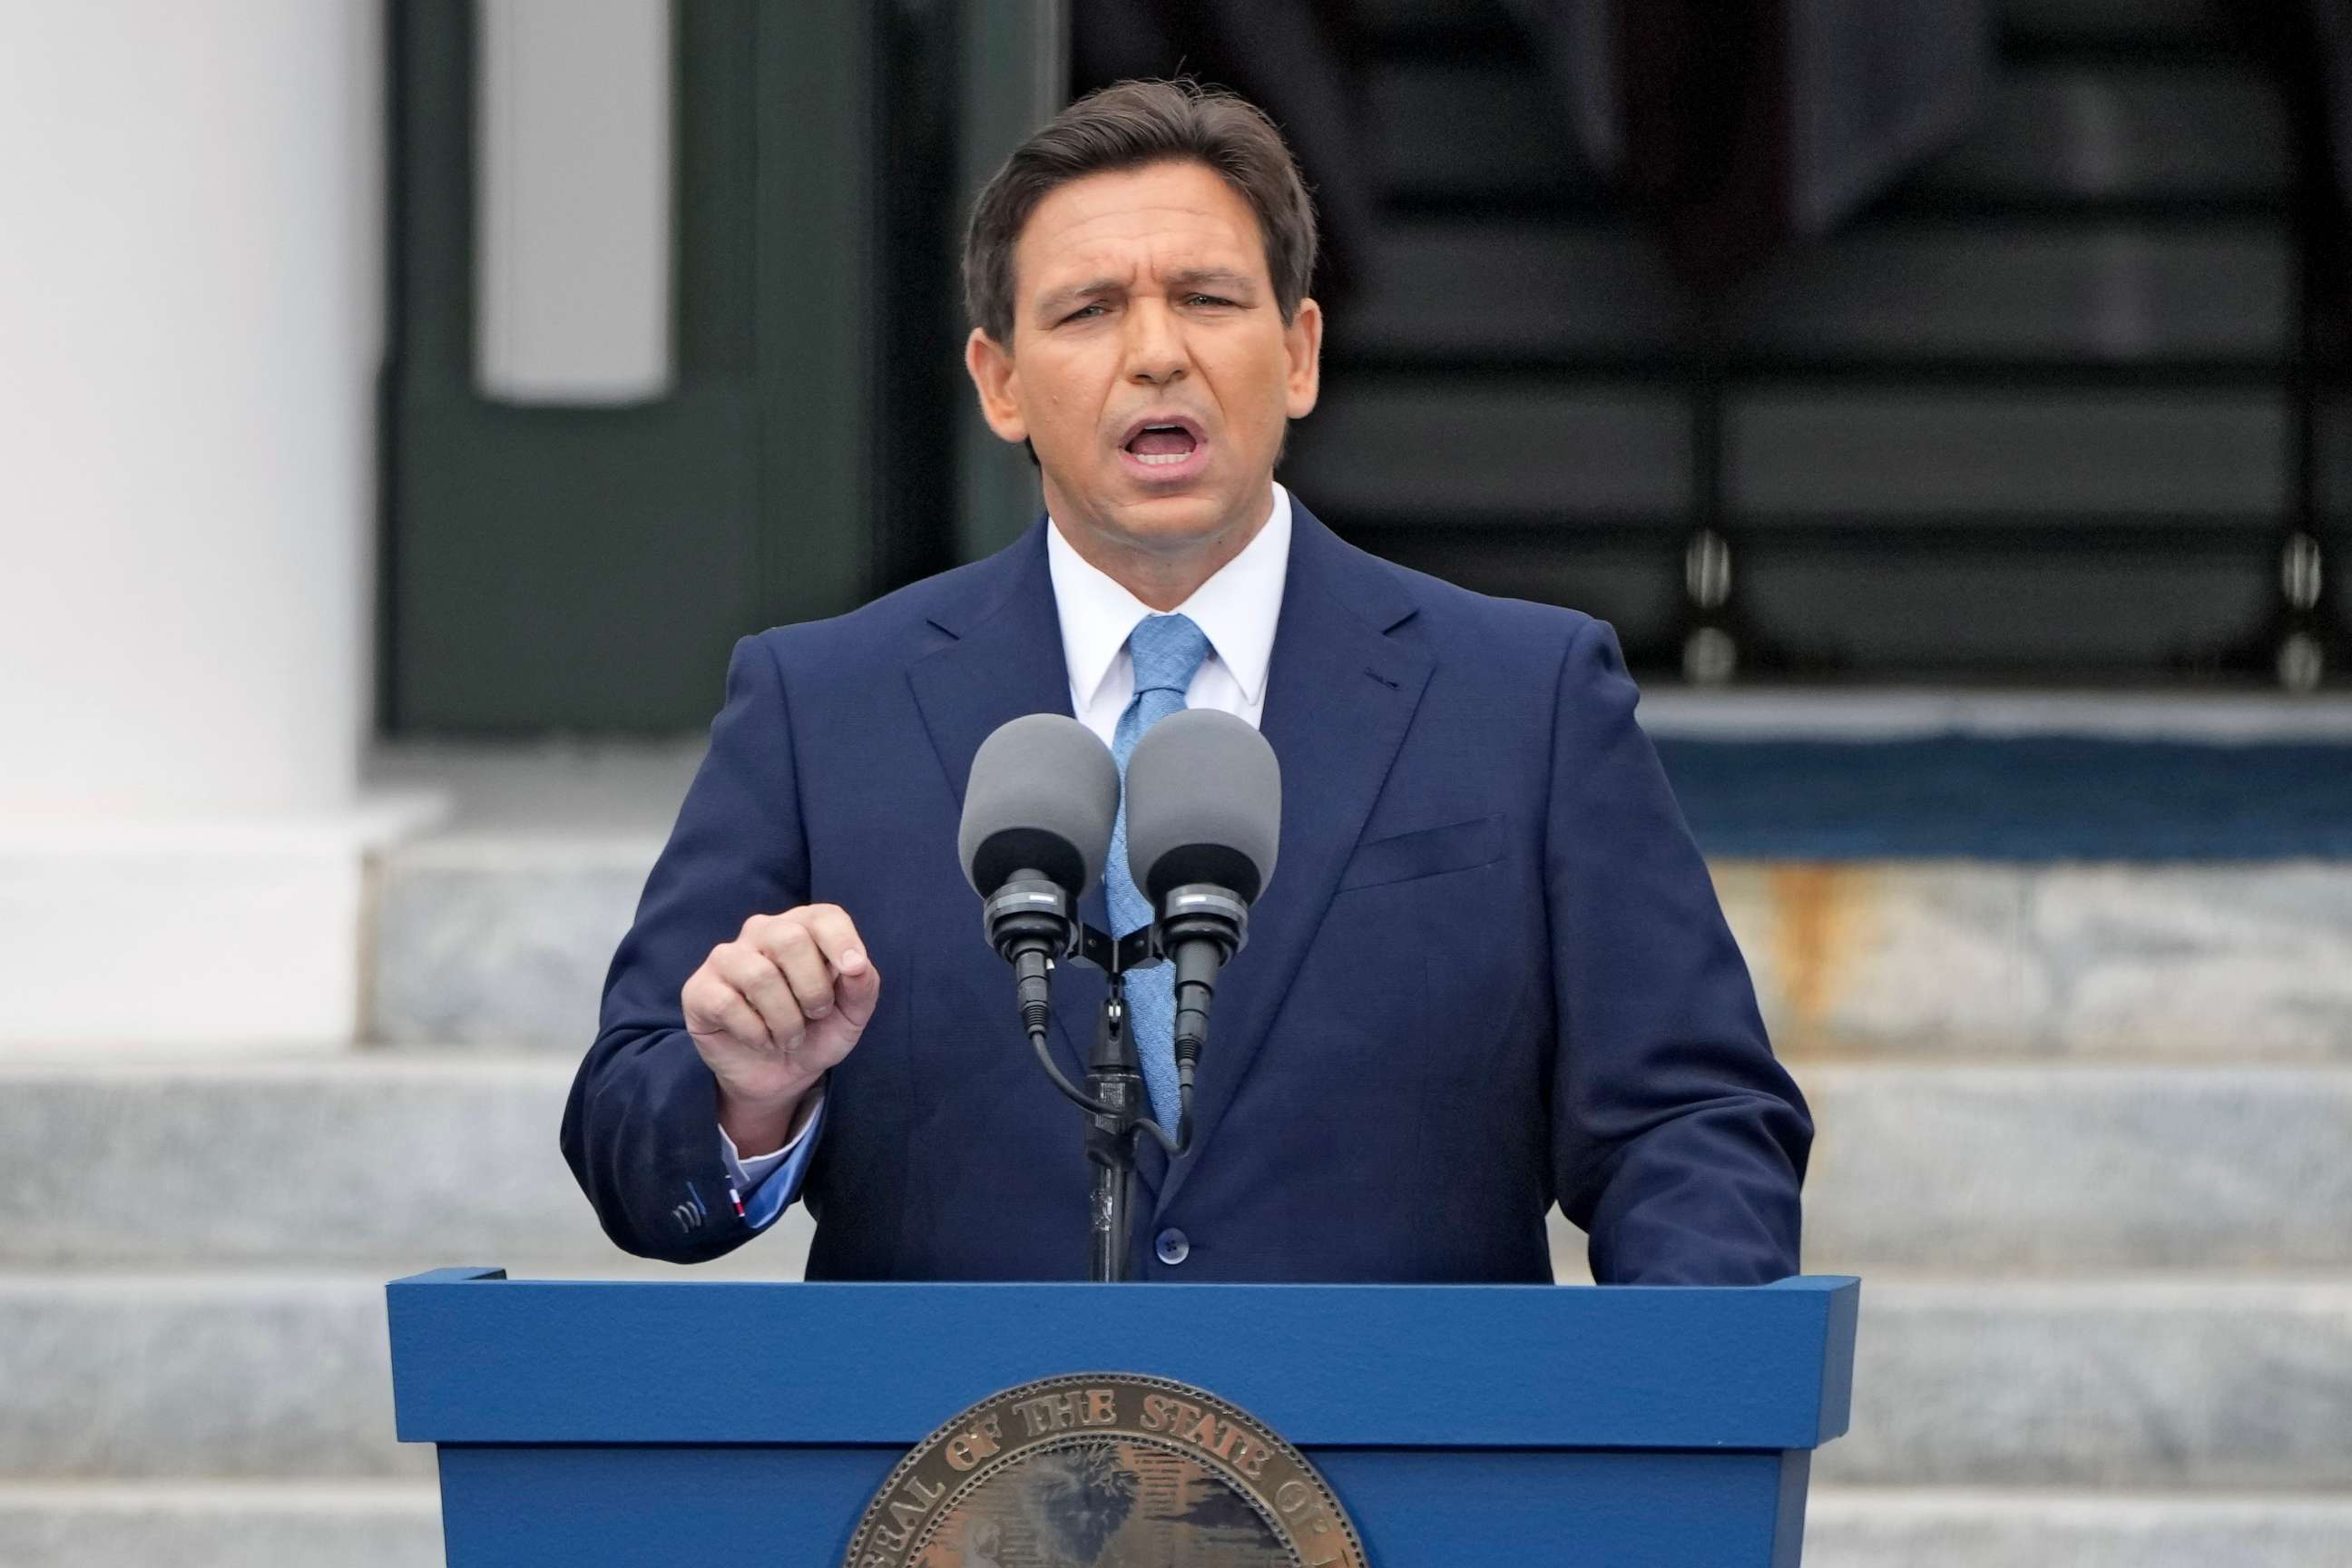 PHOTO: Florida Gov. Ron DeSantis speaks after being sworn in for his second term, Jan. 3, 2023, in Tallahassee, Fla.